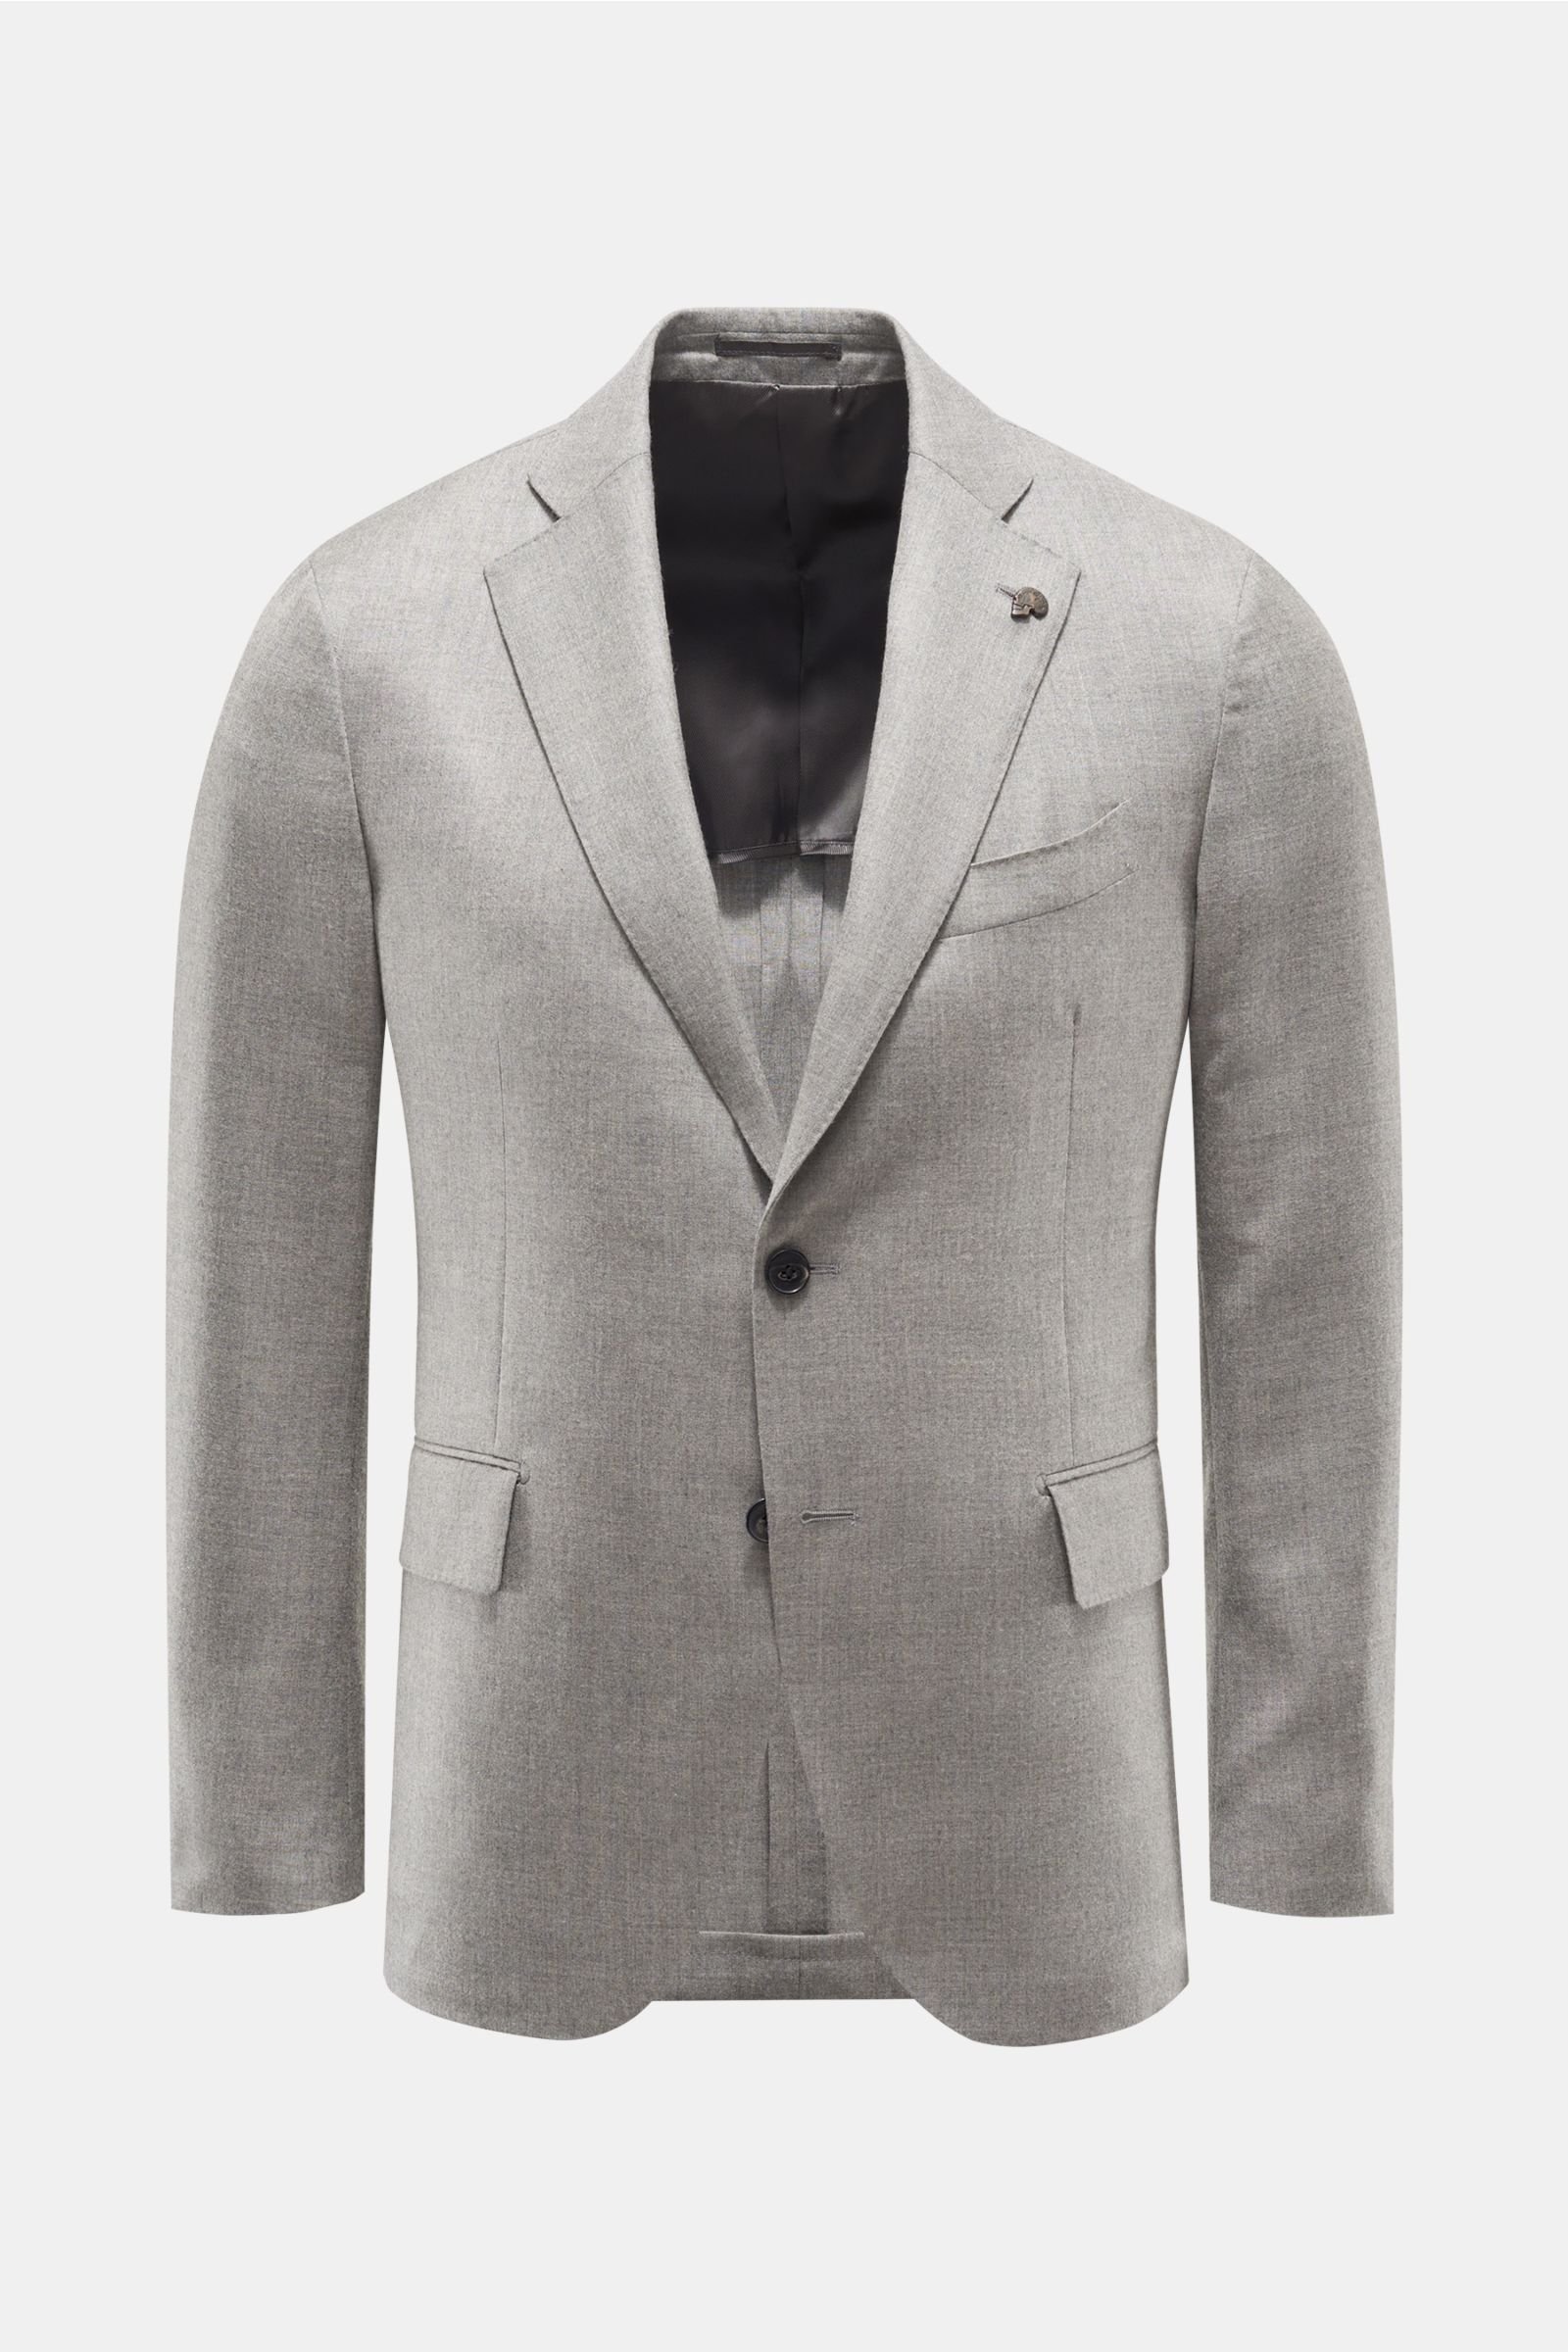 Cashmere smart-casual jacket grey